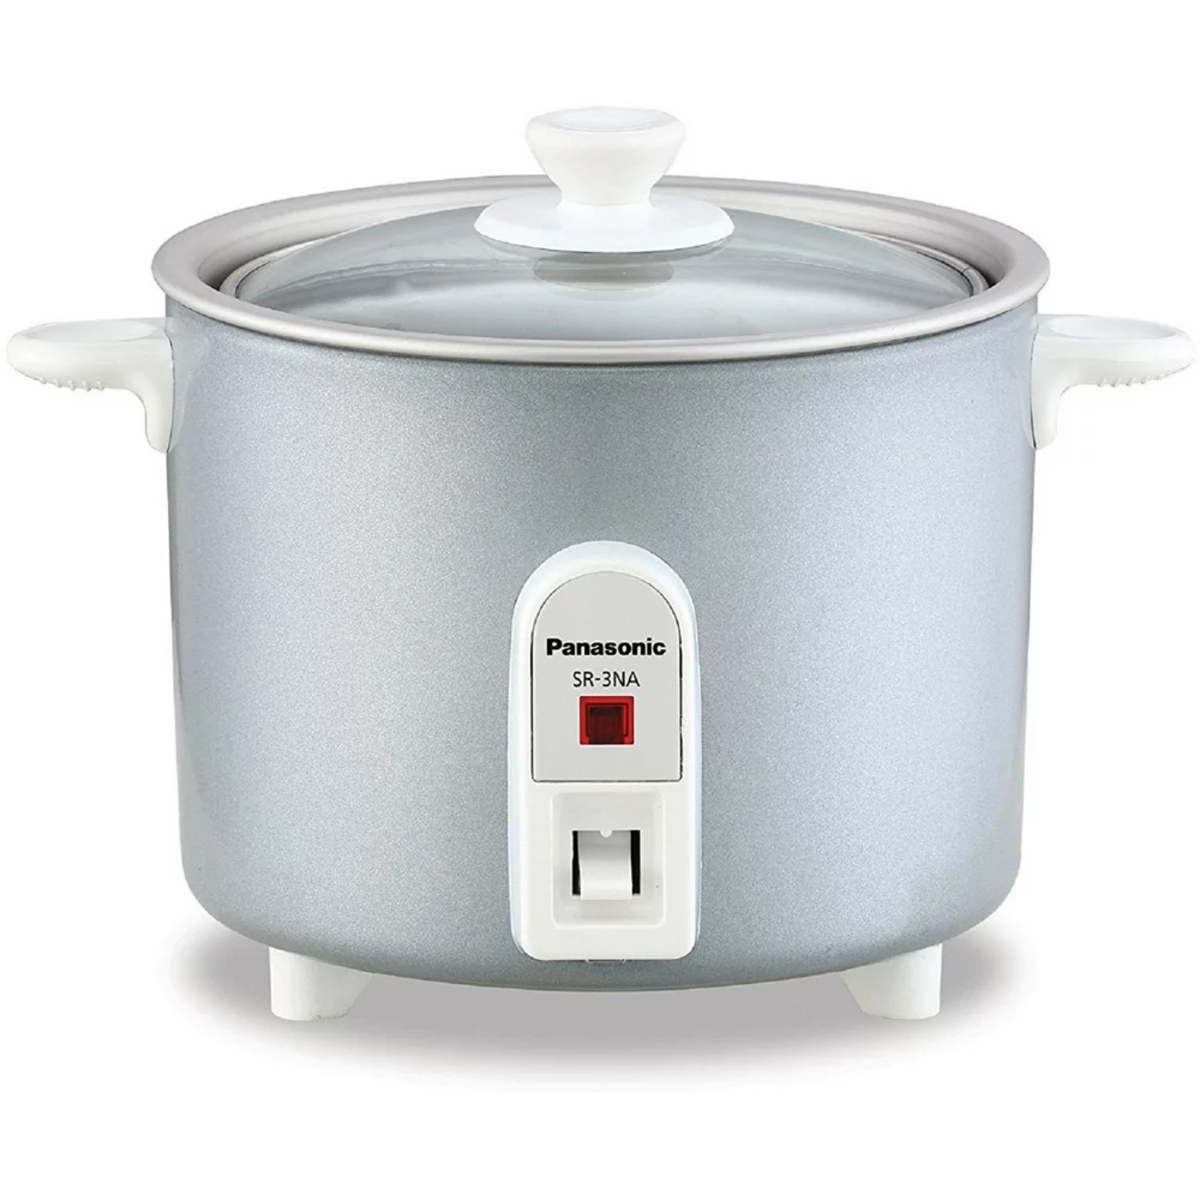 15 Incredible Panasonic Rice Cooker 1.5 Cup For 2023